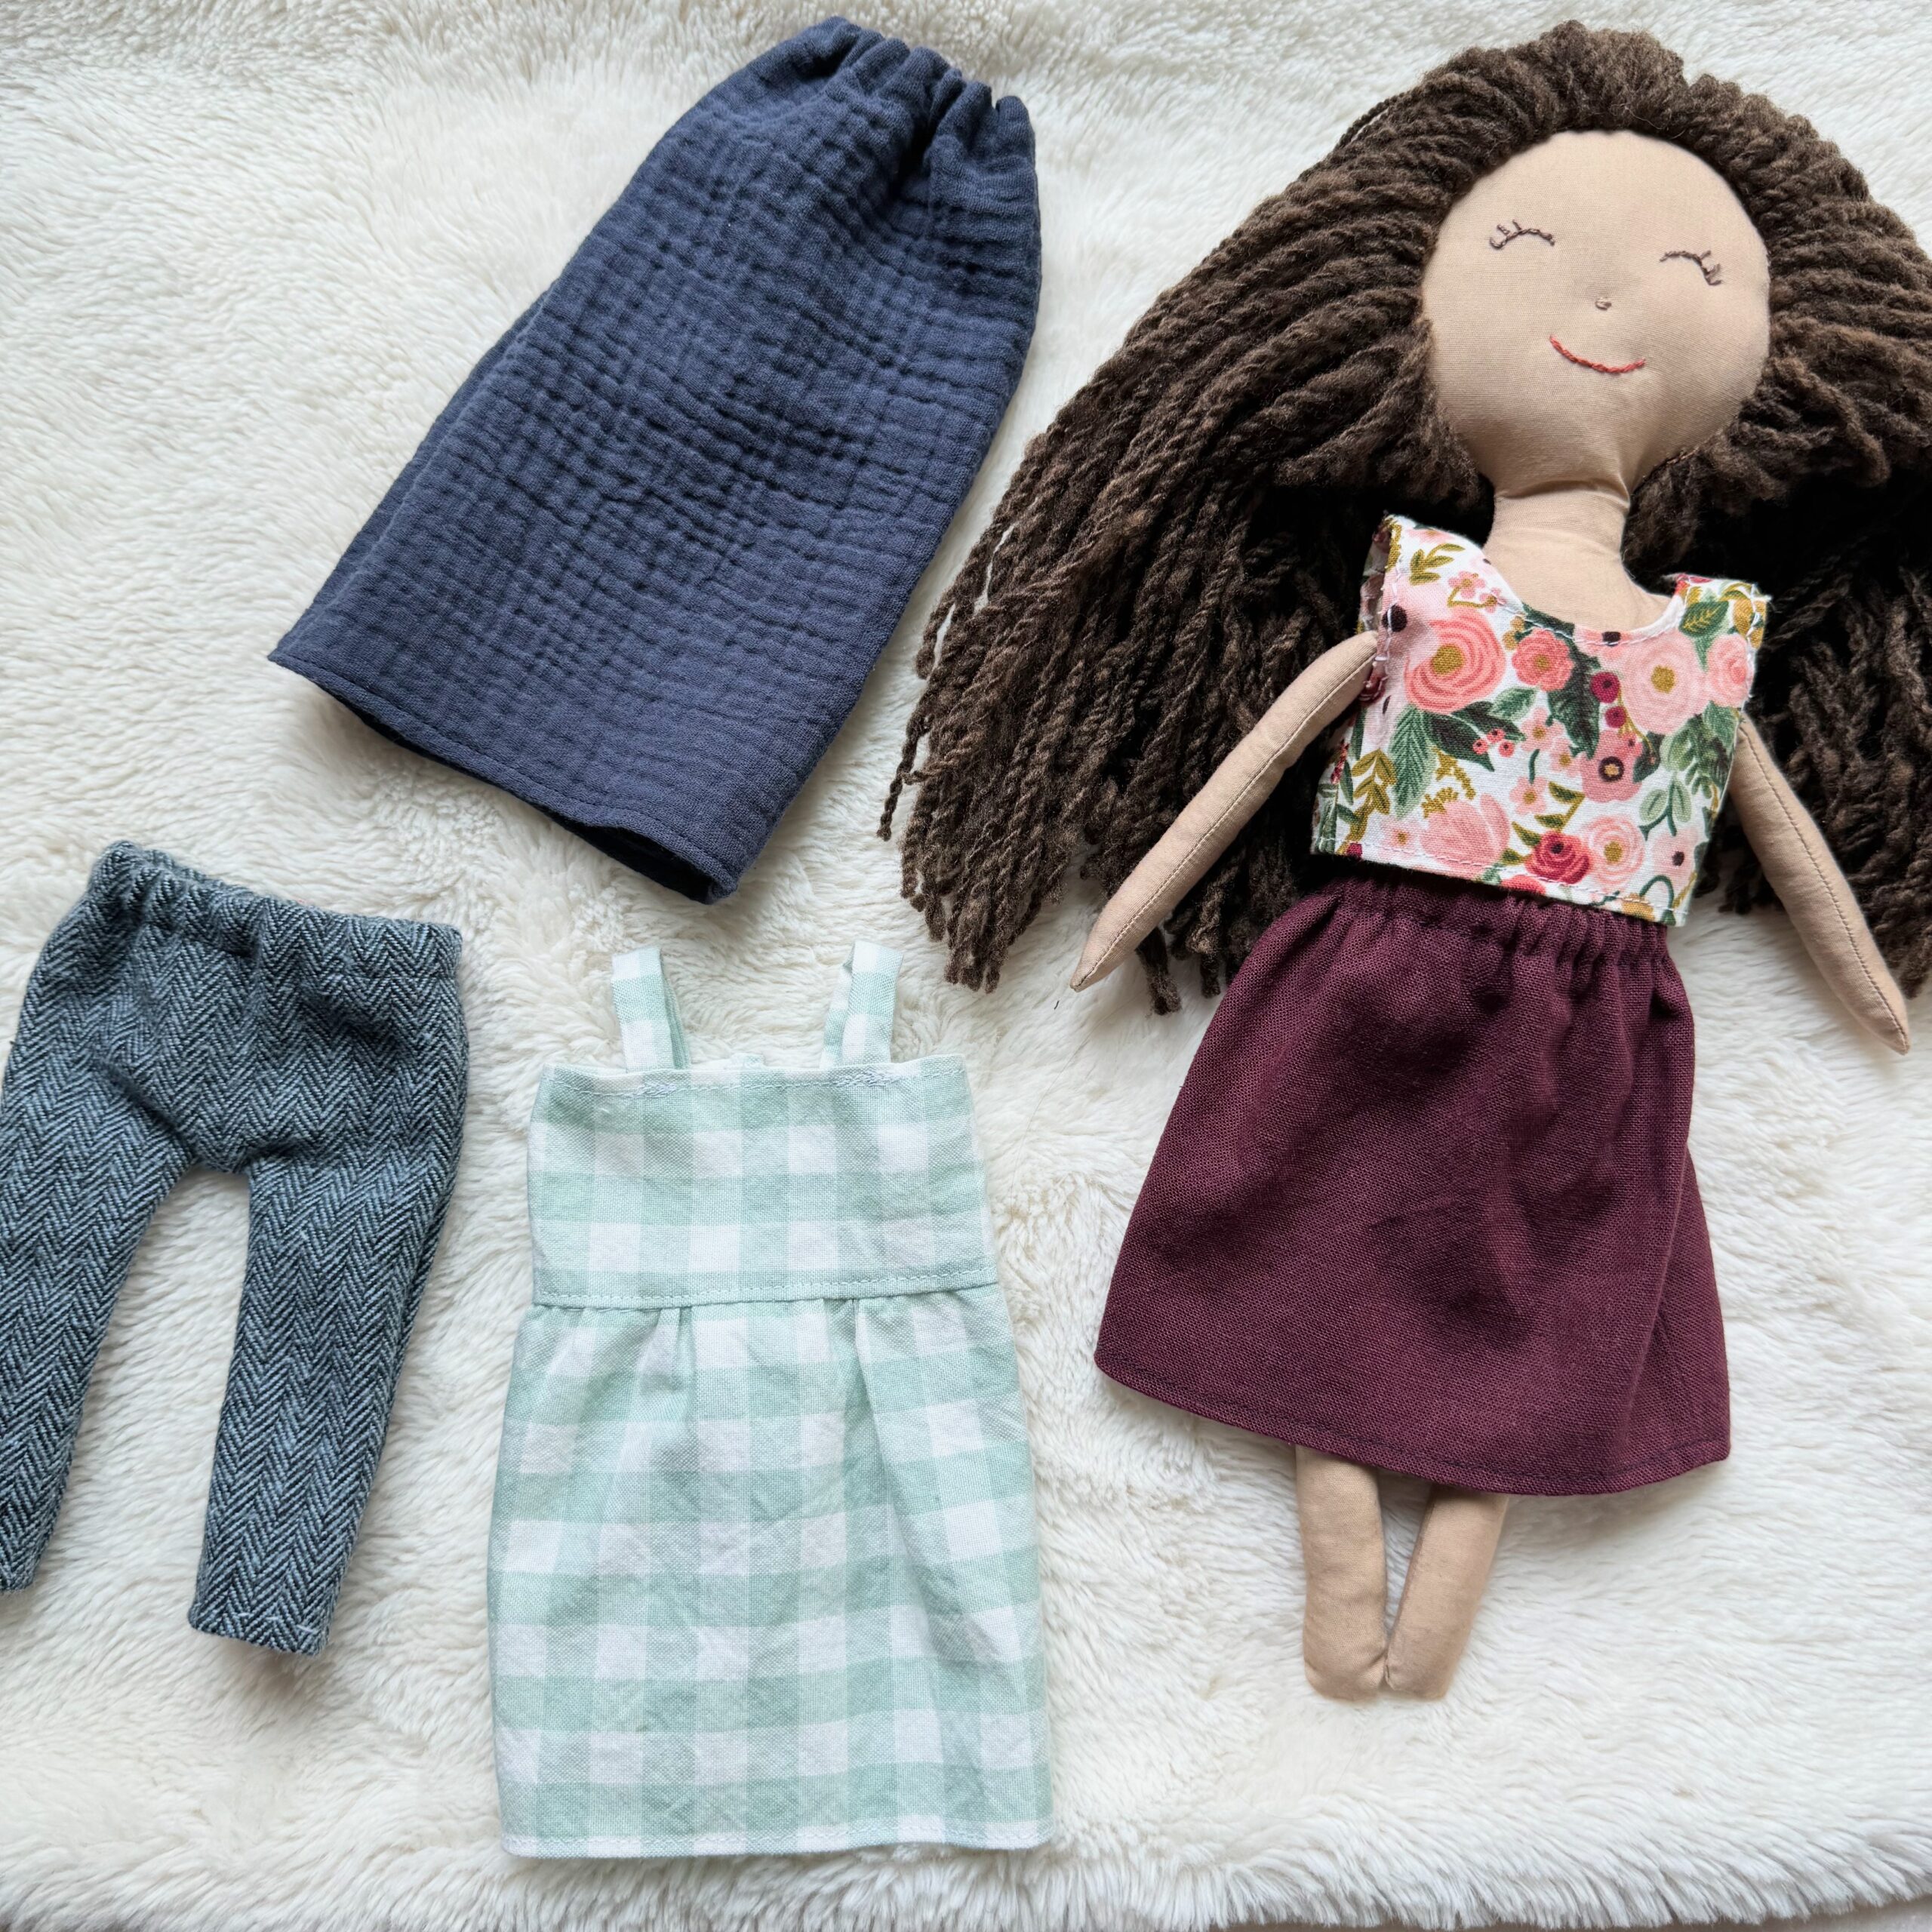 Sew Clothes for Rag Dolls – Free Patterns!